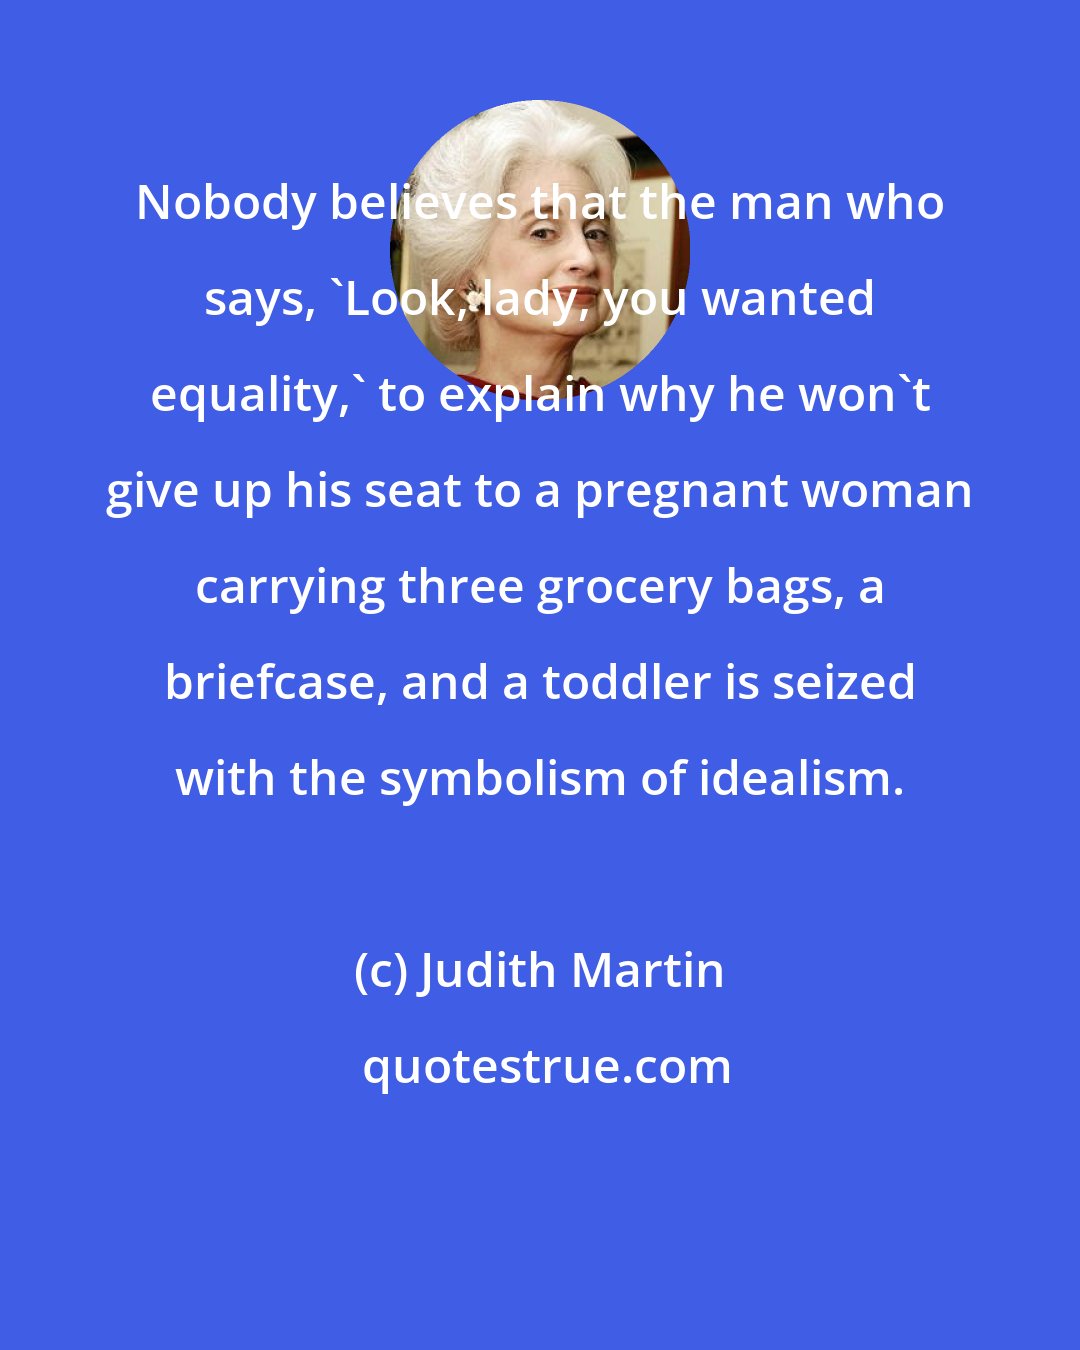 Judith Martin: Nobody believes that the man who says, 'Look, lady, you wanted equality,' to explain why he won't give up his seat to a pregnant woman carrying three grocery bags, a briefcase, and a toddler is seized with the symbolism of idealism.